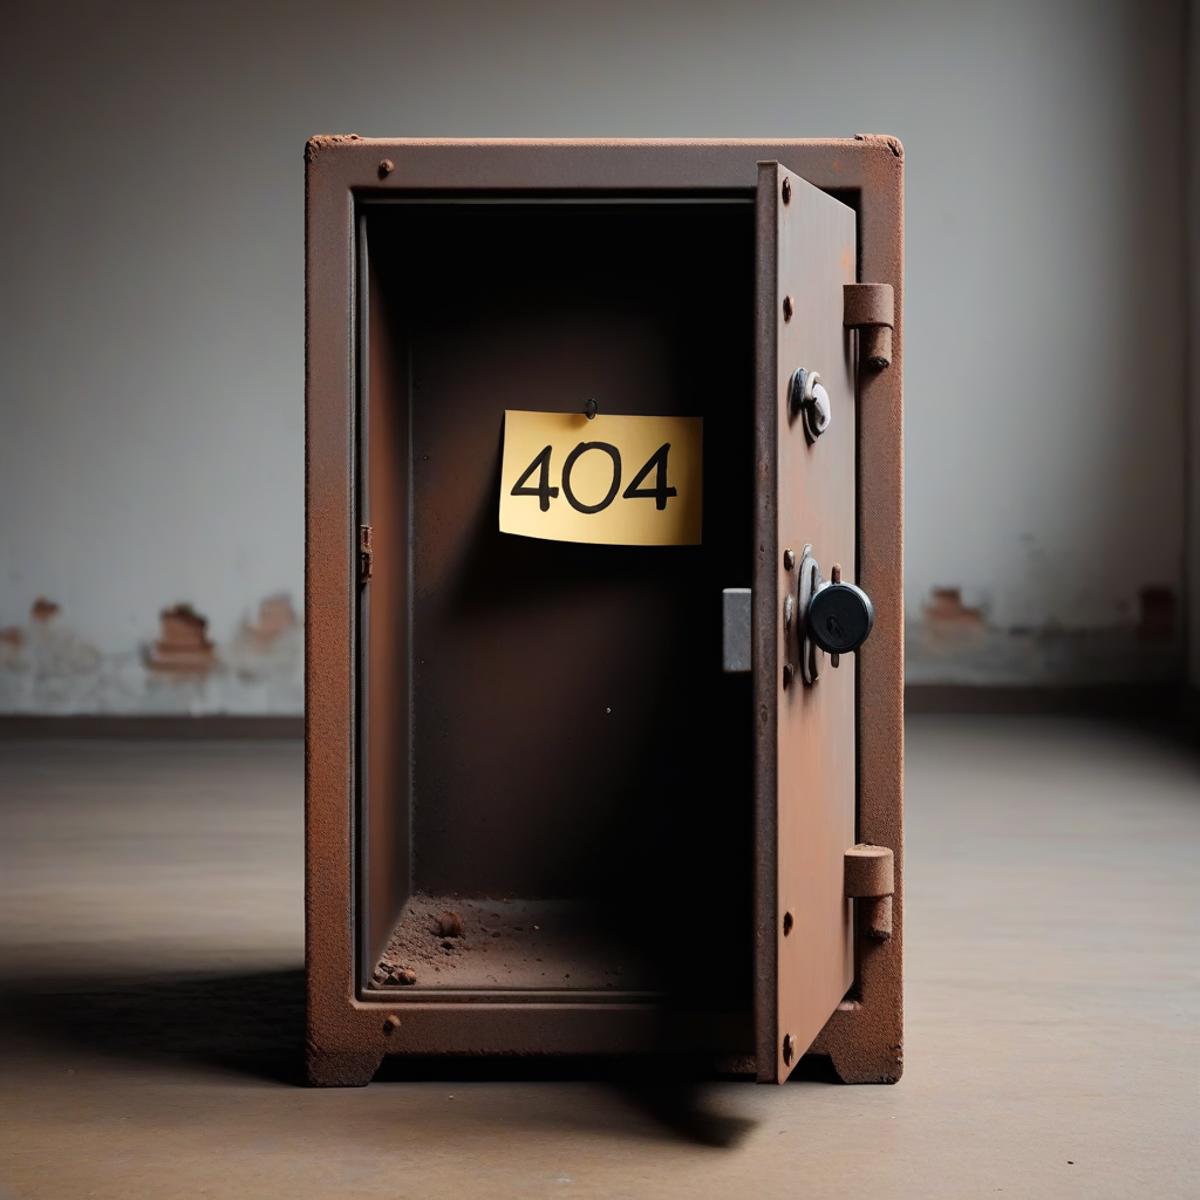 A brown wooden box with a 404 error message on it.